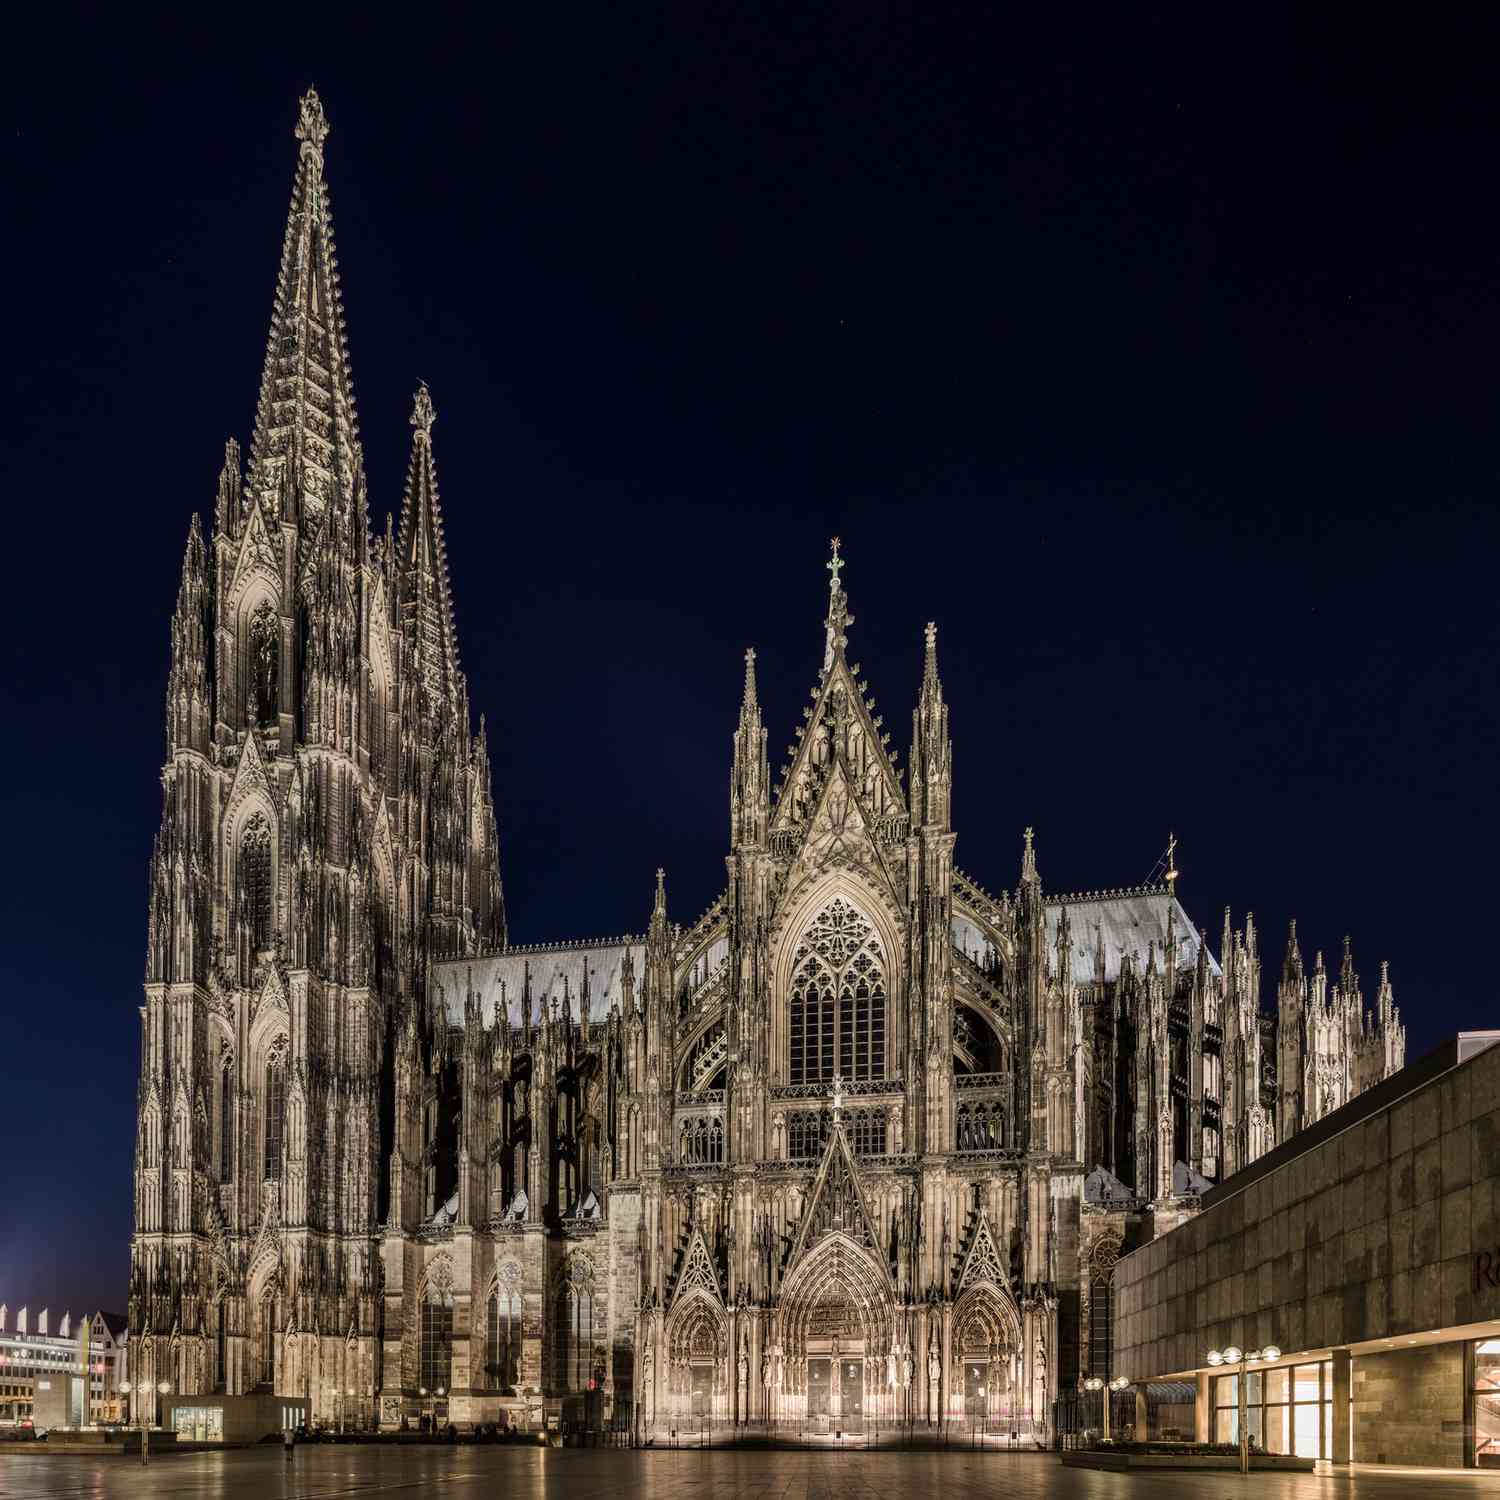 Famous Gothic cathedral, Cologne Cathedral